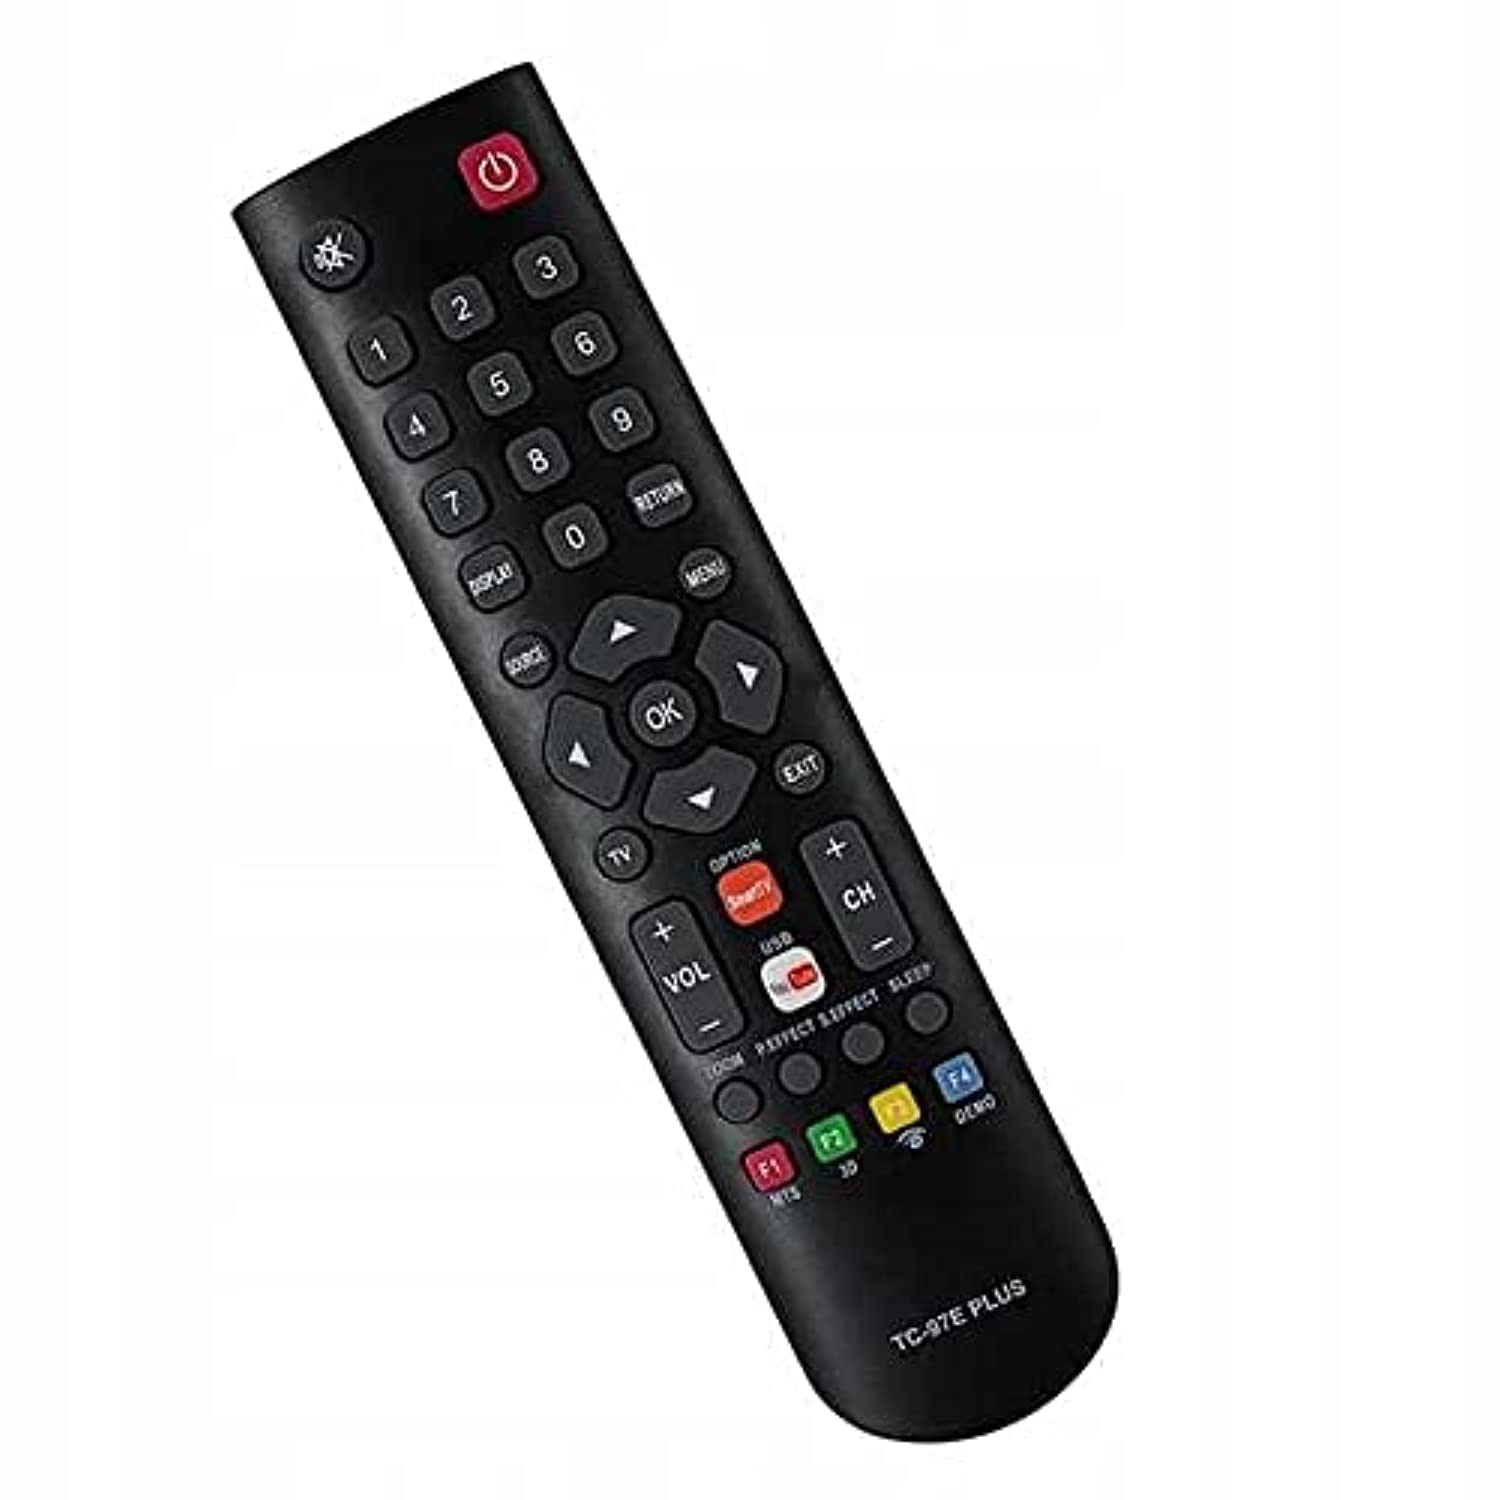 TC-97E PLUS HUAYU Universal USE FOR TCL SMART LCD LED TV Remote Control:Buy Online at Best Price in Egypt - Souq is now Amazon.eg